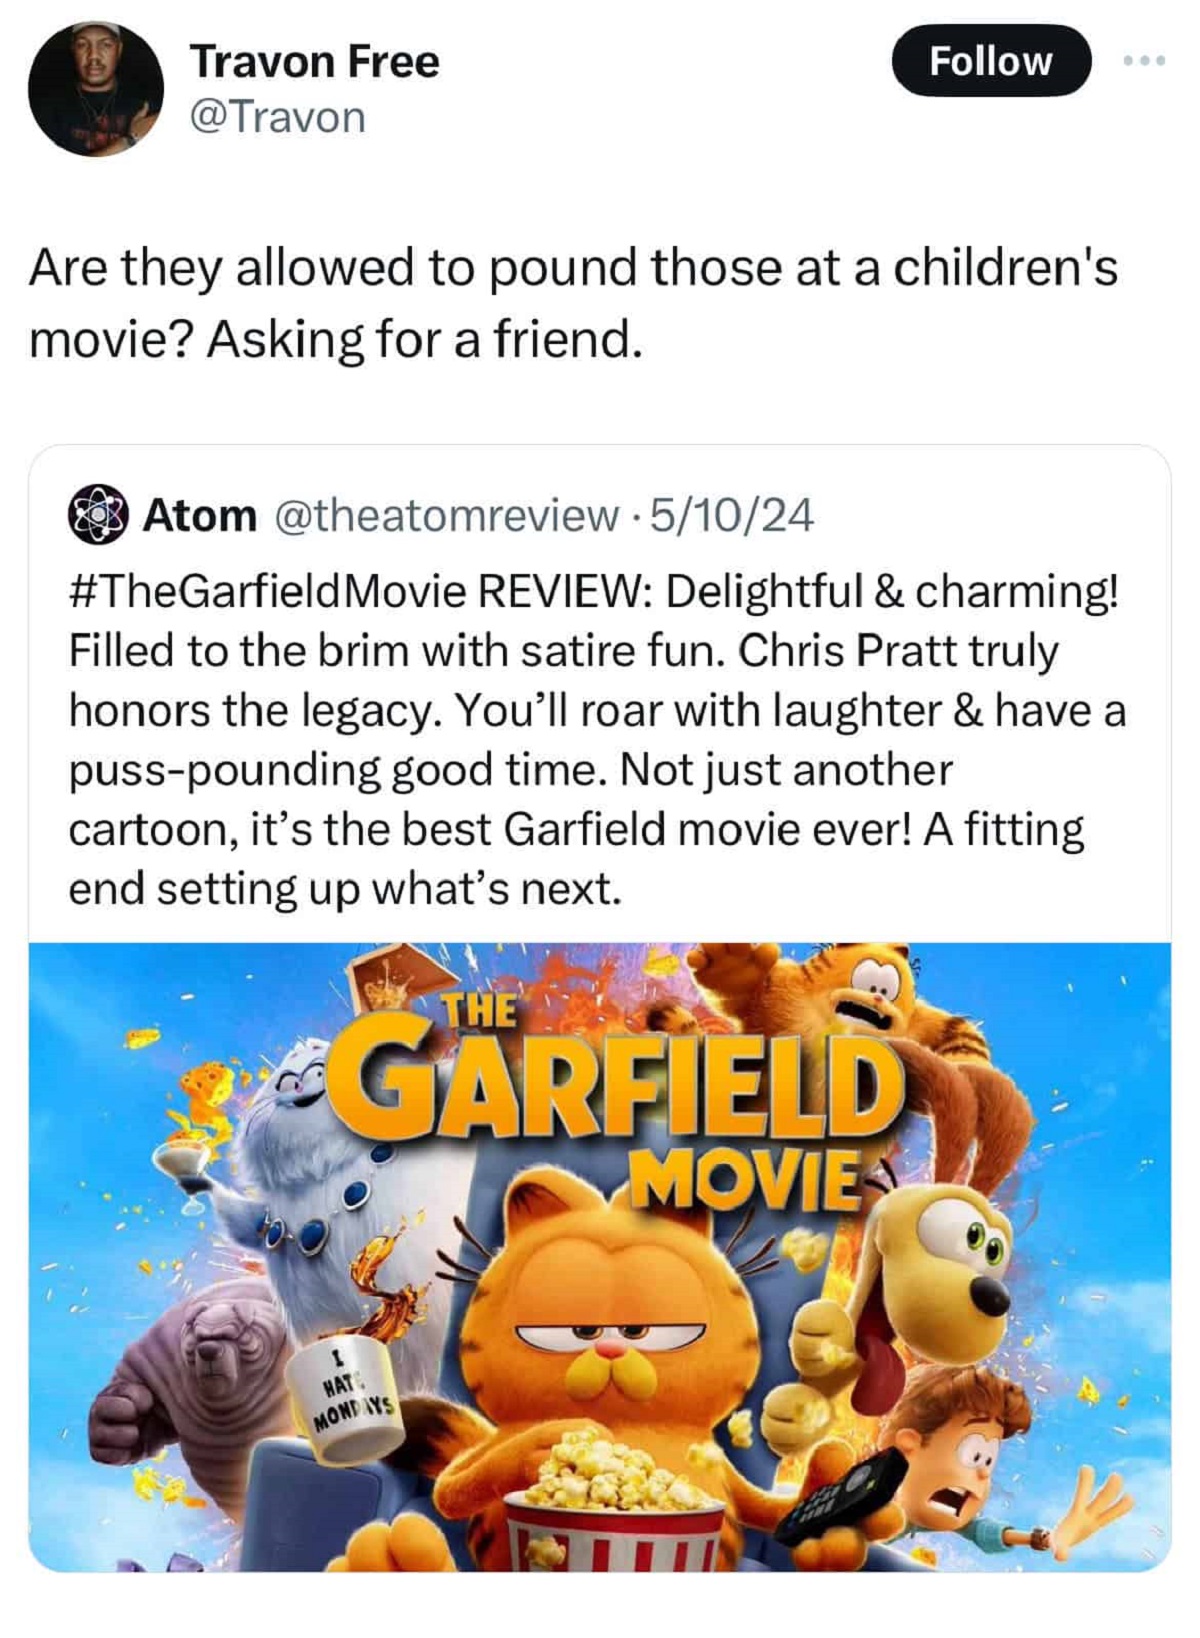 garfield movie - Travon Free Are they allowed to pound those at a children's movie? Asking for a friend. Atom 51024 Movie Review Delightful & charming! Filled to the brim with satire fun. Chris Pratt truly honors the legacy. You'll roar with laughter & ha